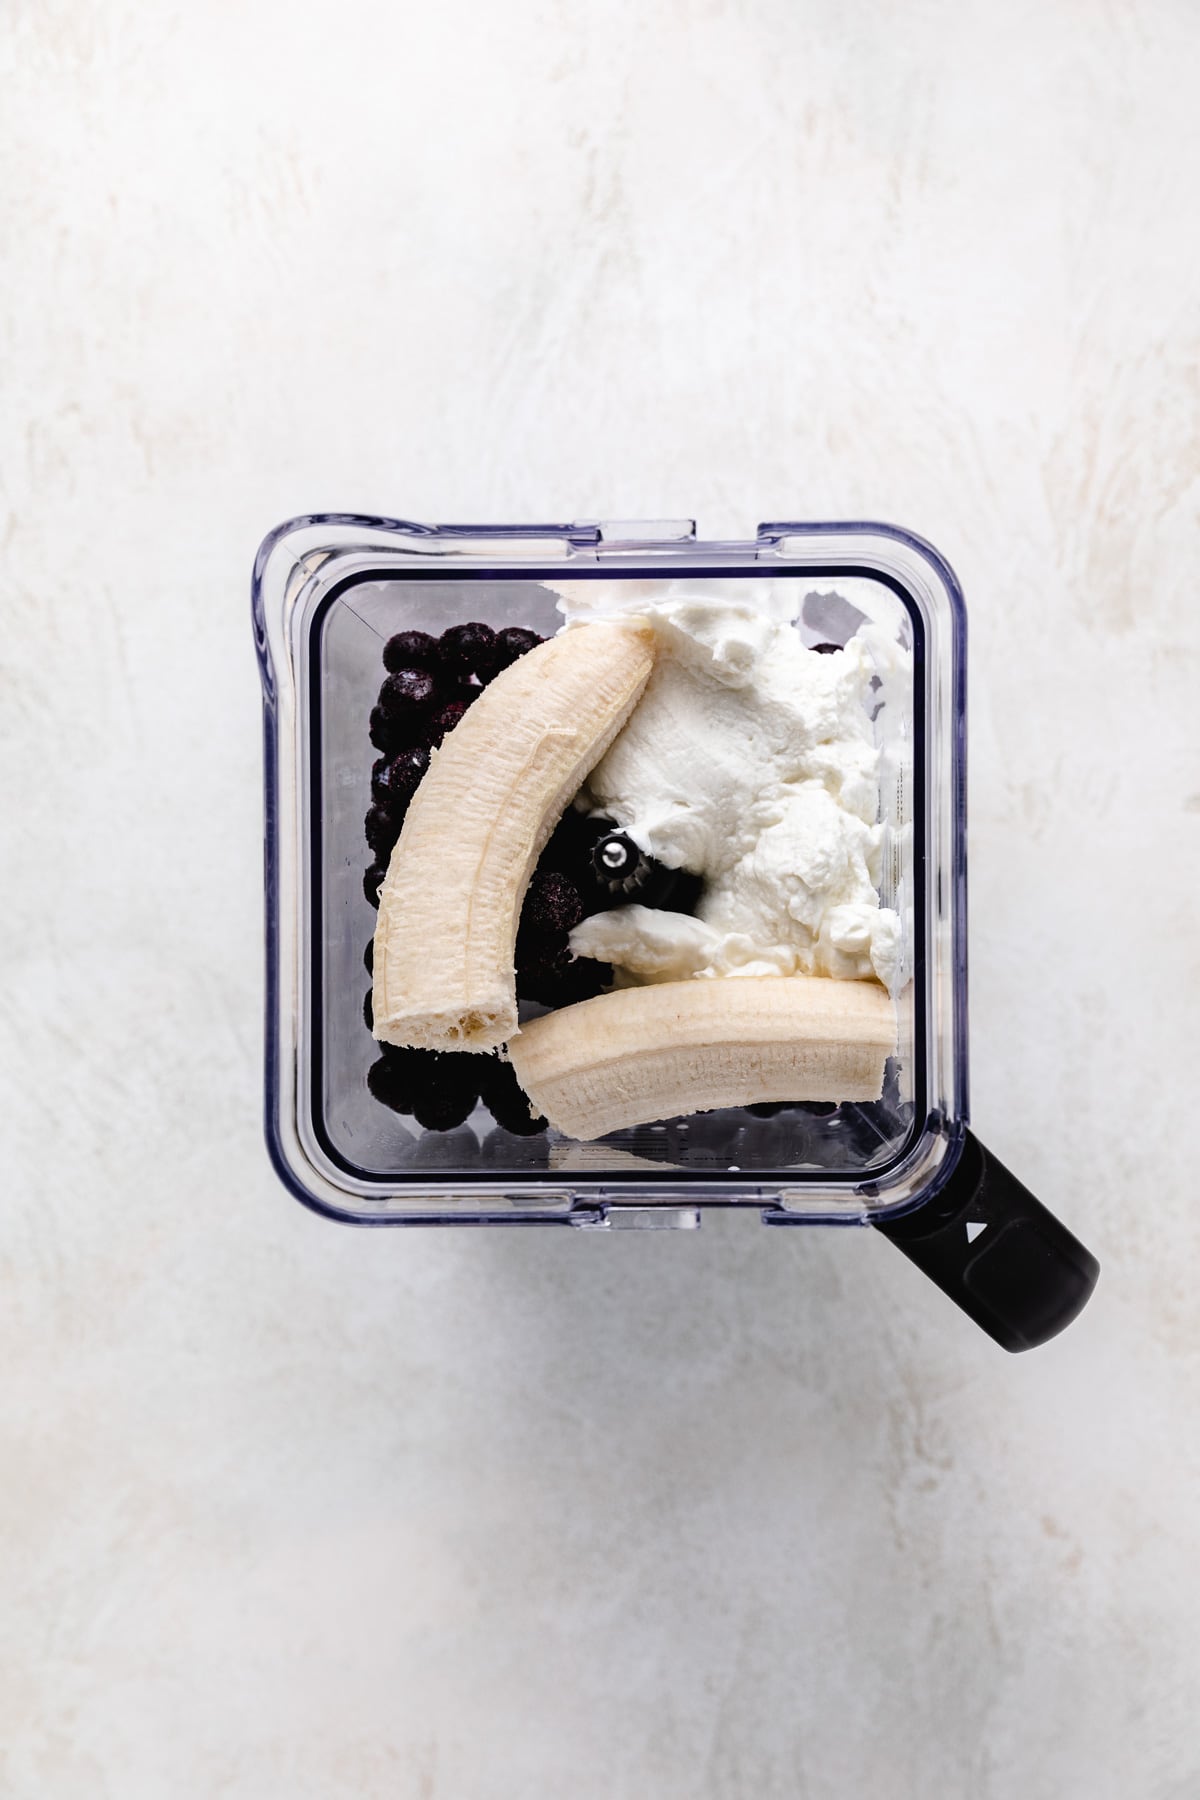 Bananas in a blender with yogurt and blueberries.